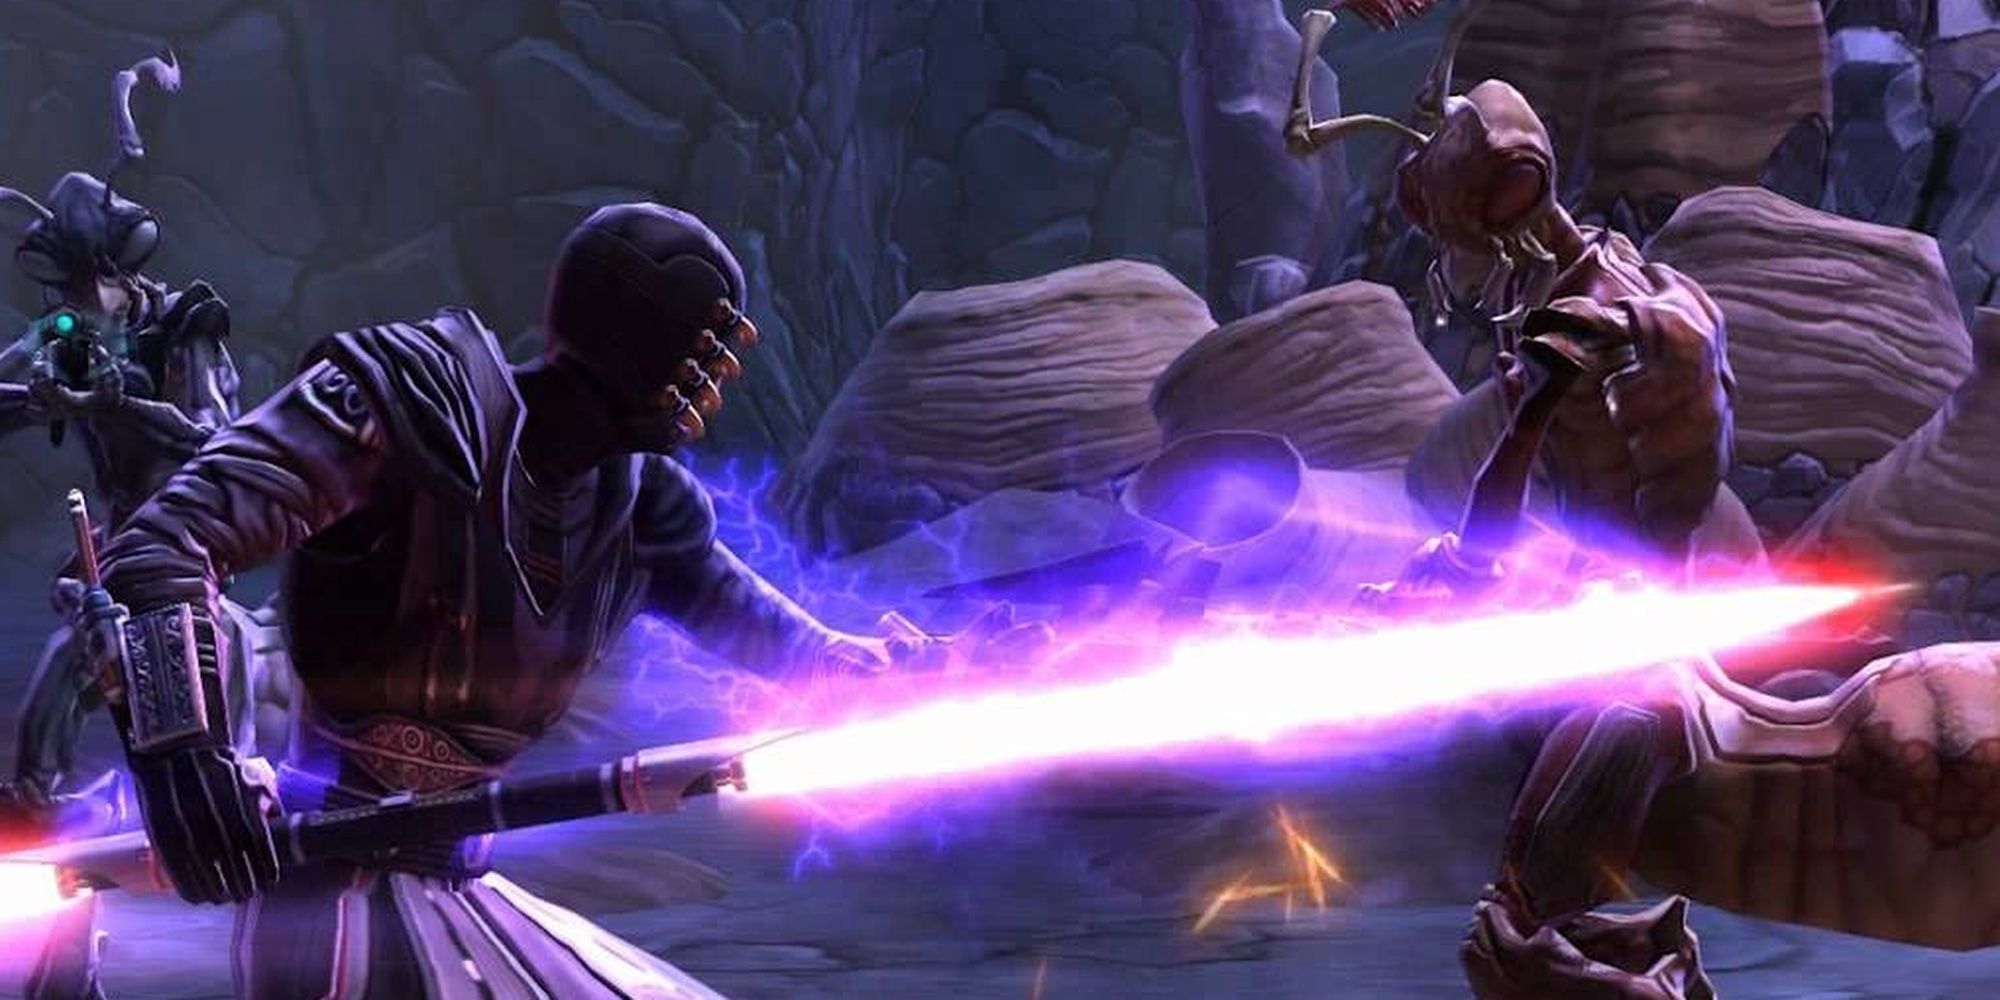 Star Wars The Old Republic Sith Inquisitor With Lightsaber Fighting Two Insectoids